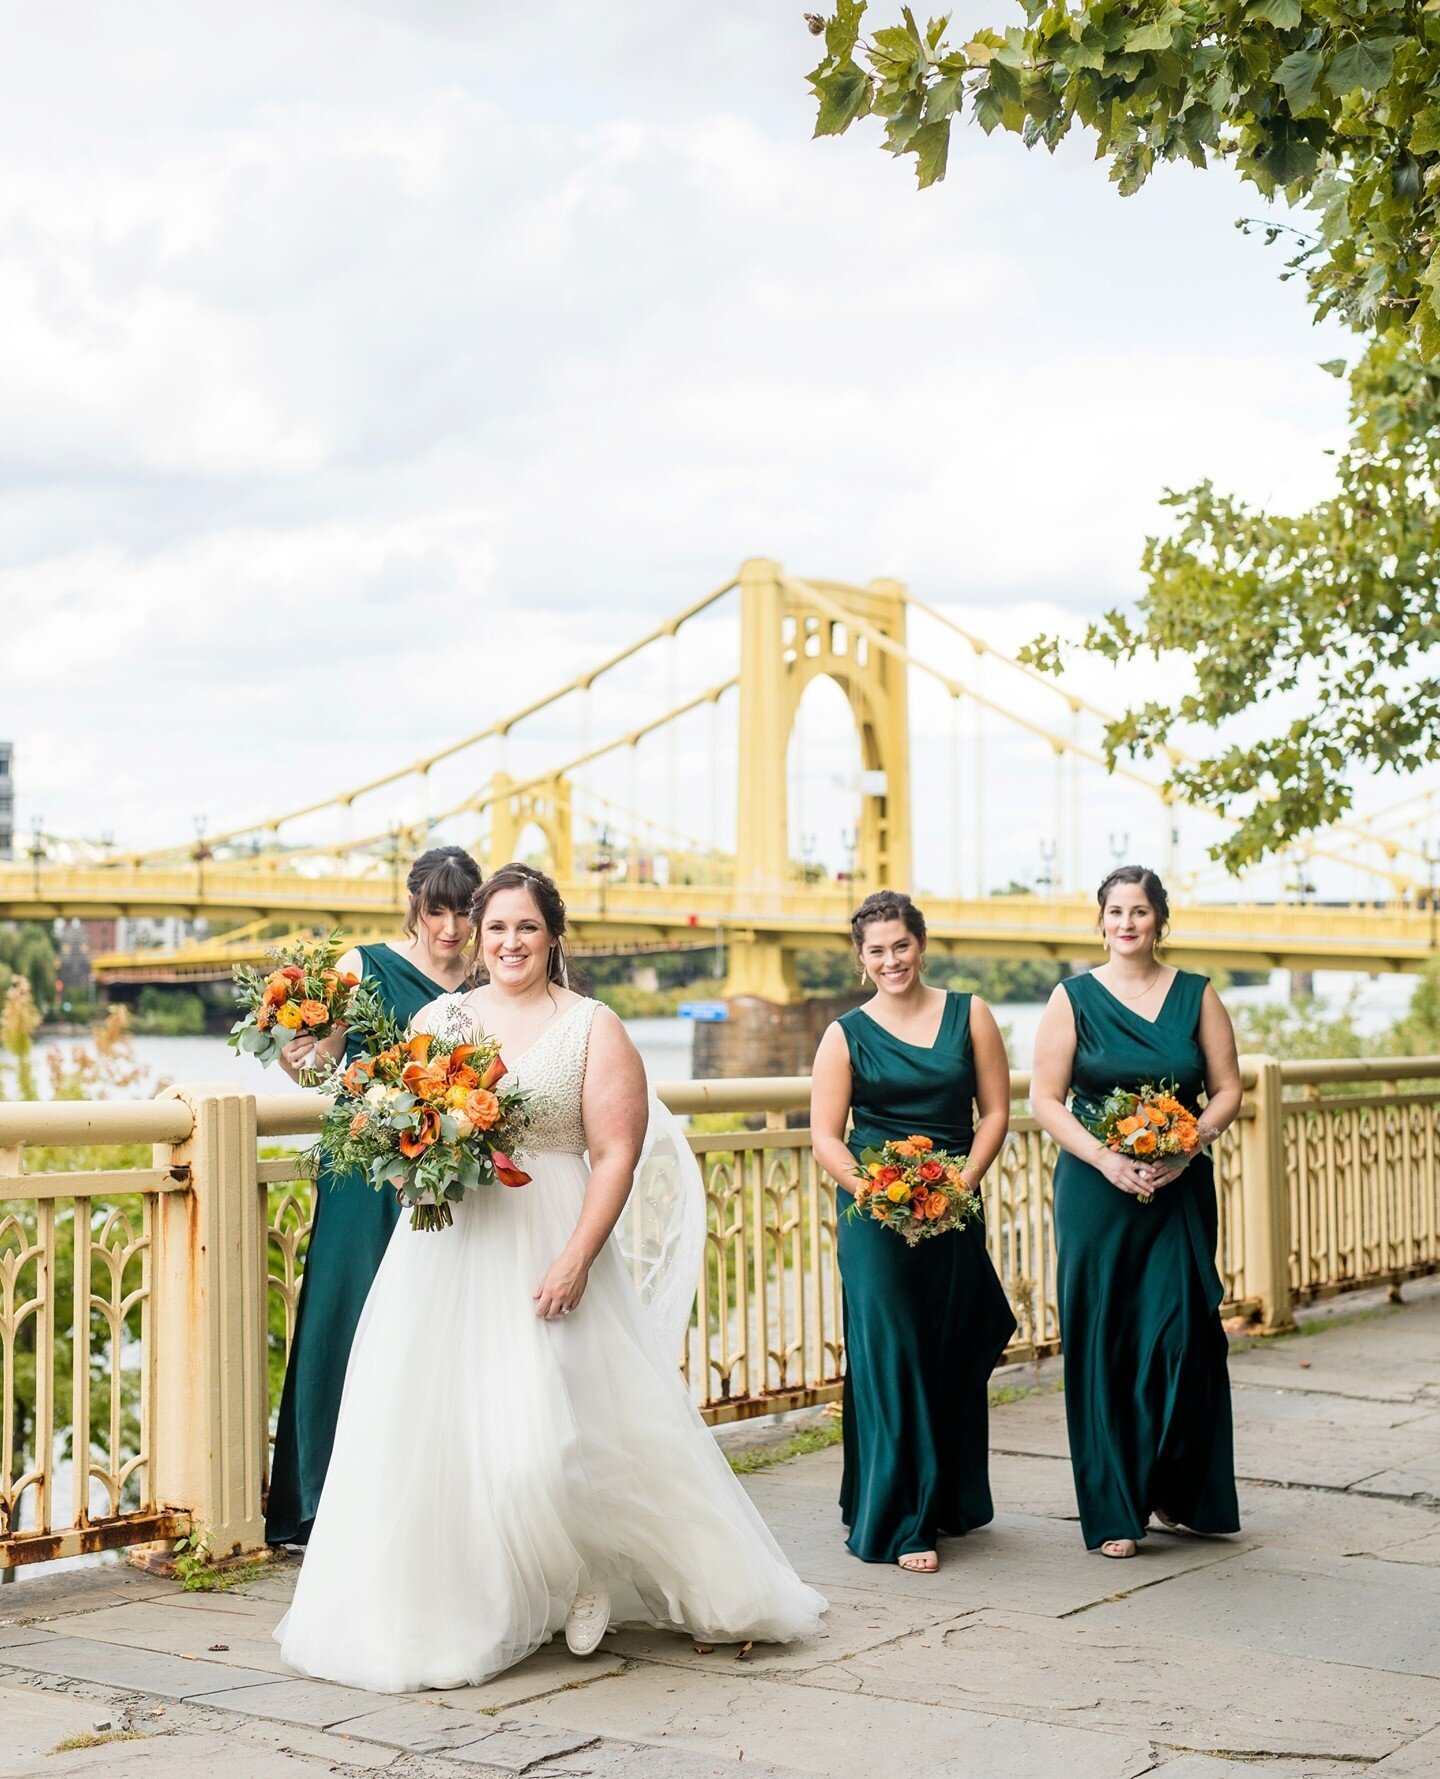 Pittsburgh sure does have some pretty spots for photos ❤️⁠
⁠
Coordinating photos in downtown Pittsburgh can take some extra thought - time to park, walking distance for the bride/bridal party, thinking through any events that might be happening downt